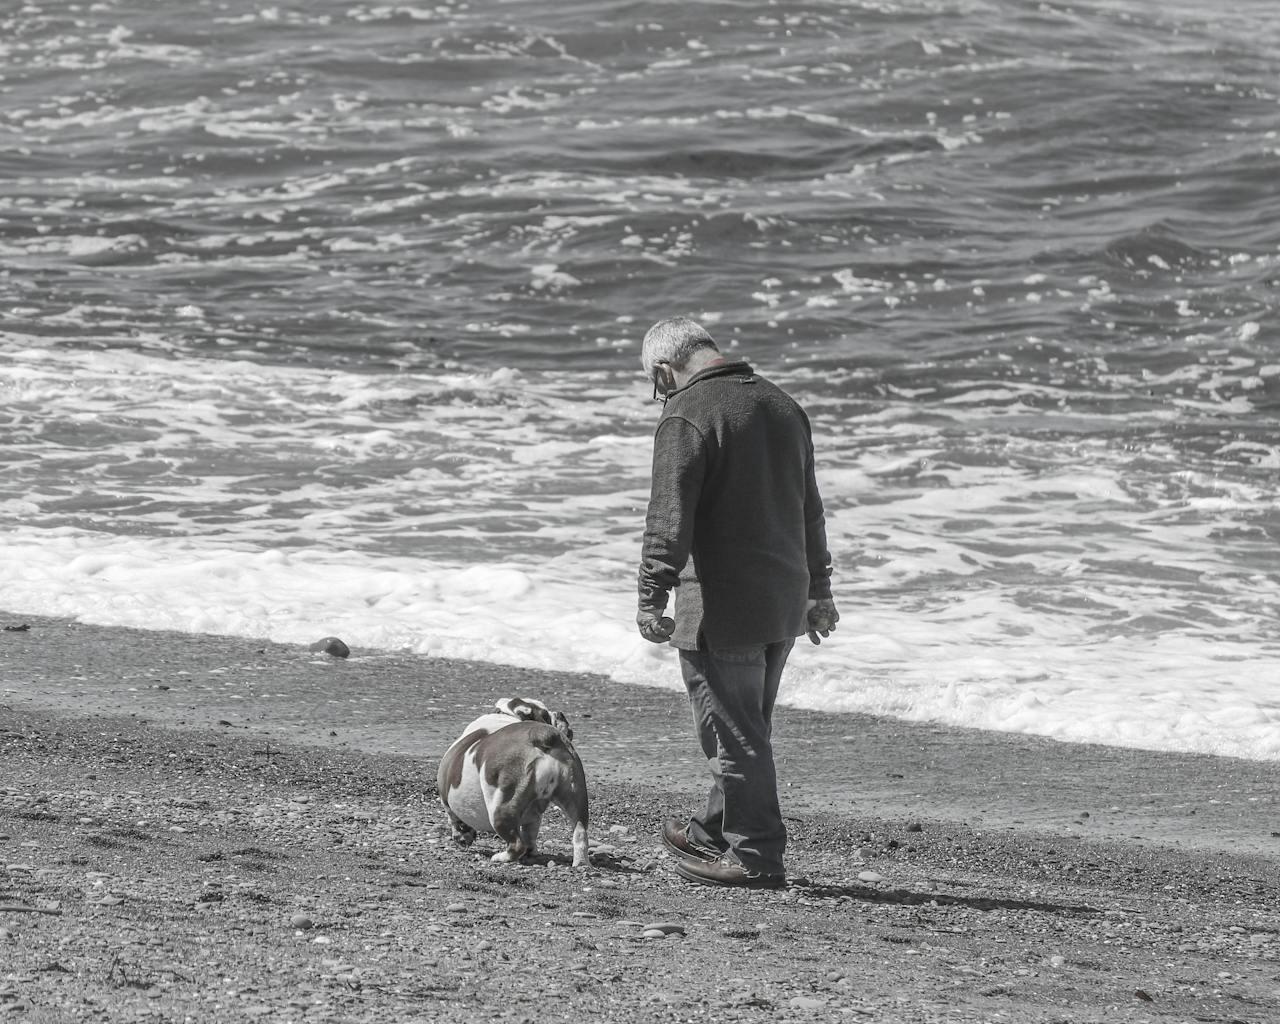 An older man walking his dog on the beach